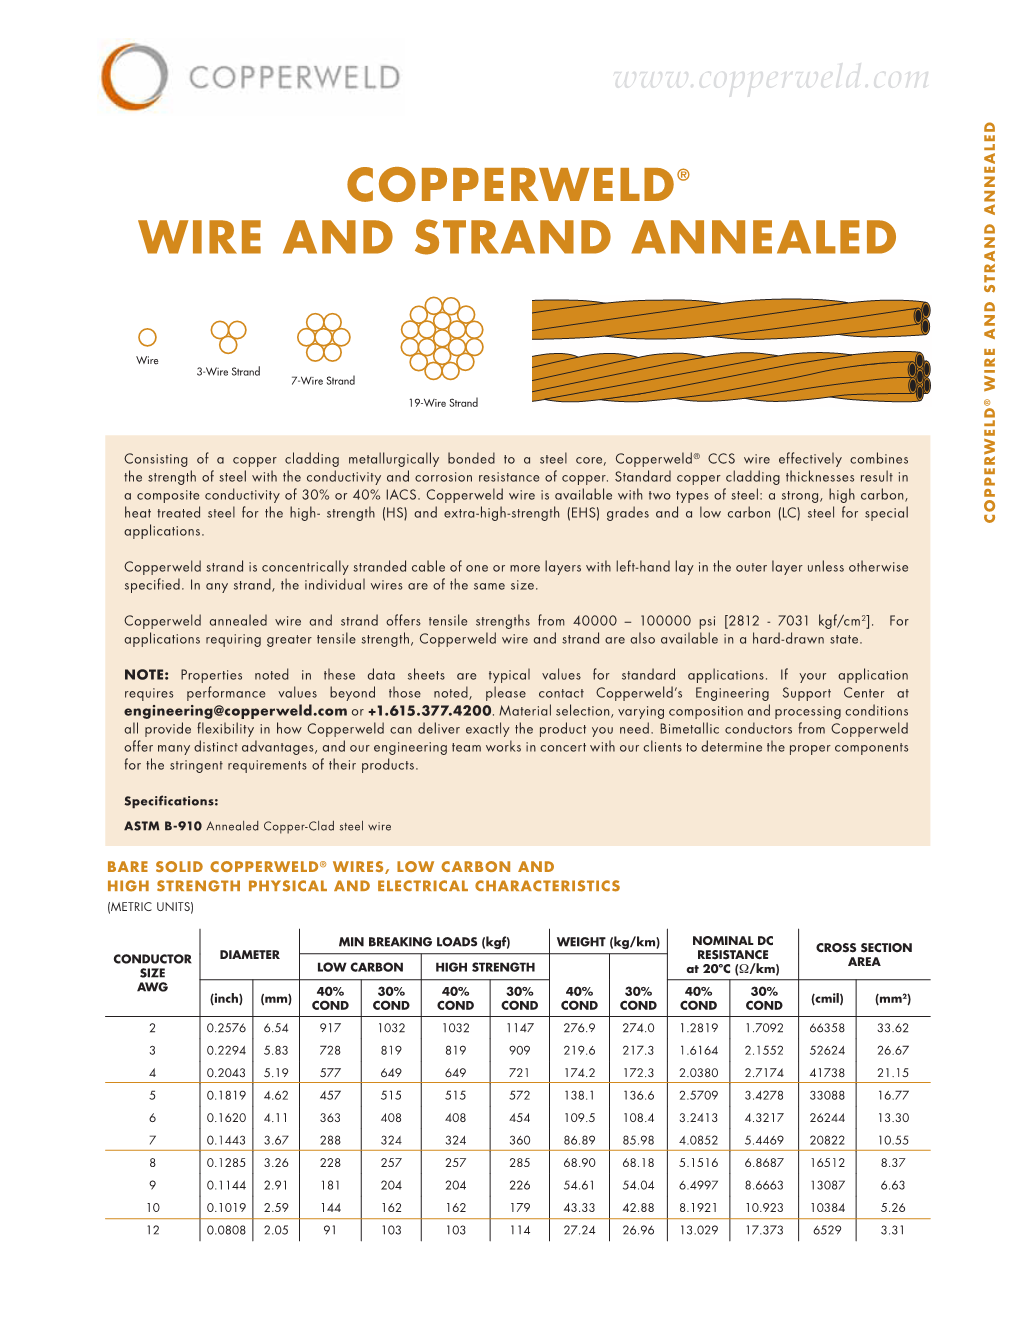 Copperweld® Wire and Strand Annealed